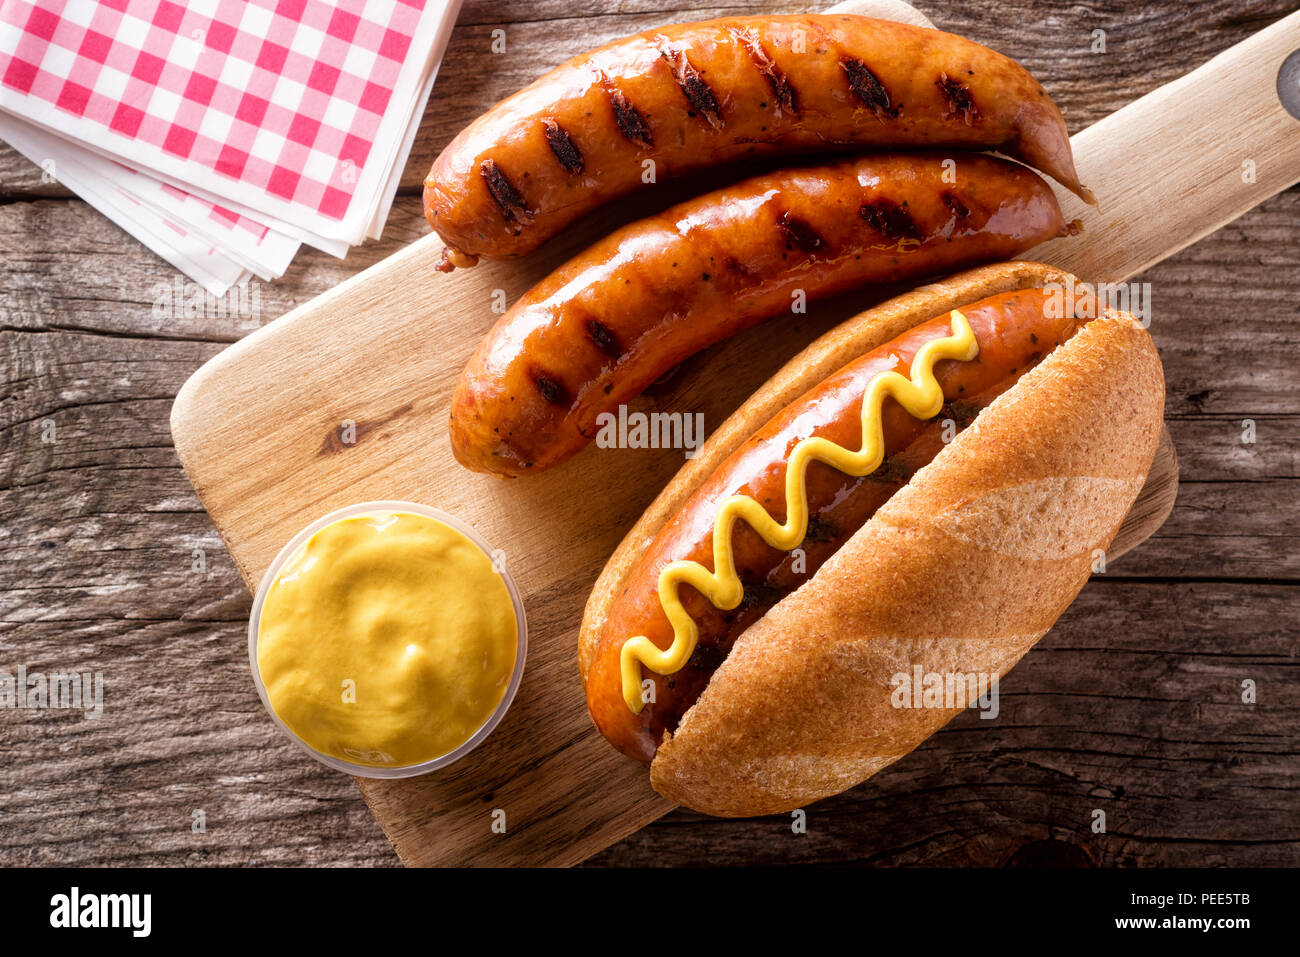 Delicious grilled smoked sausages on a roll with yellow mustard. Stock Photo